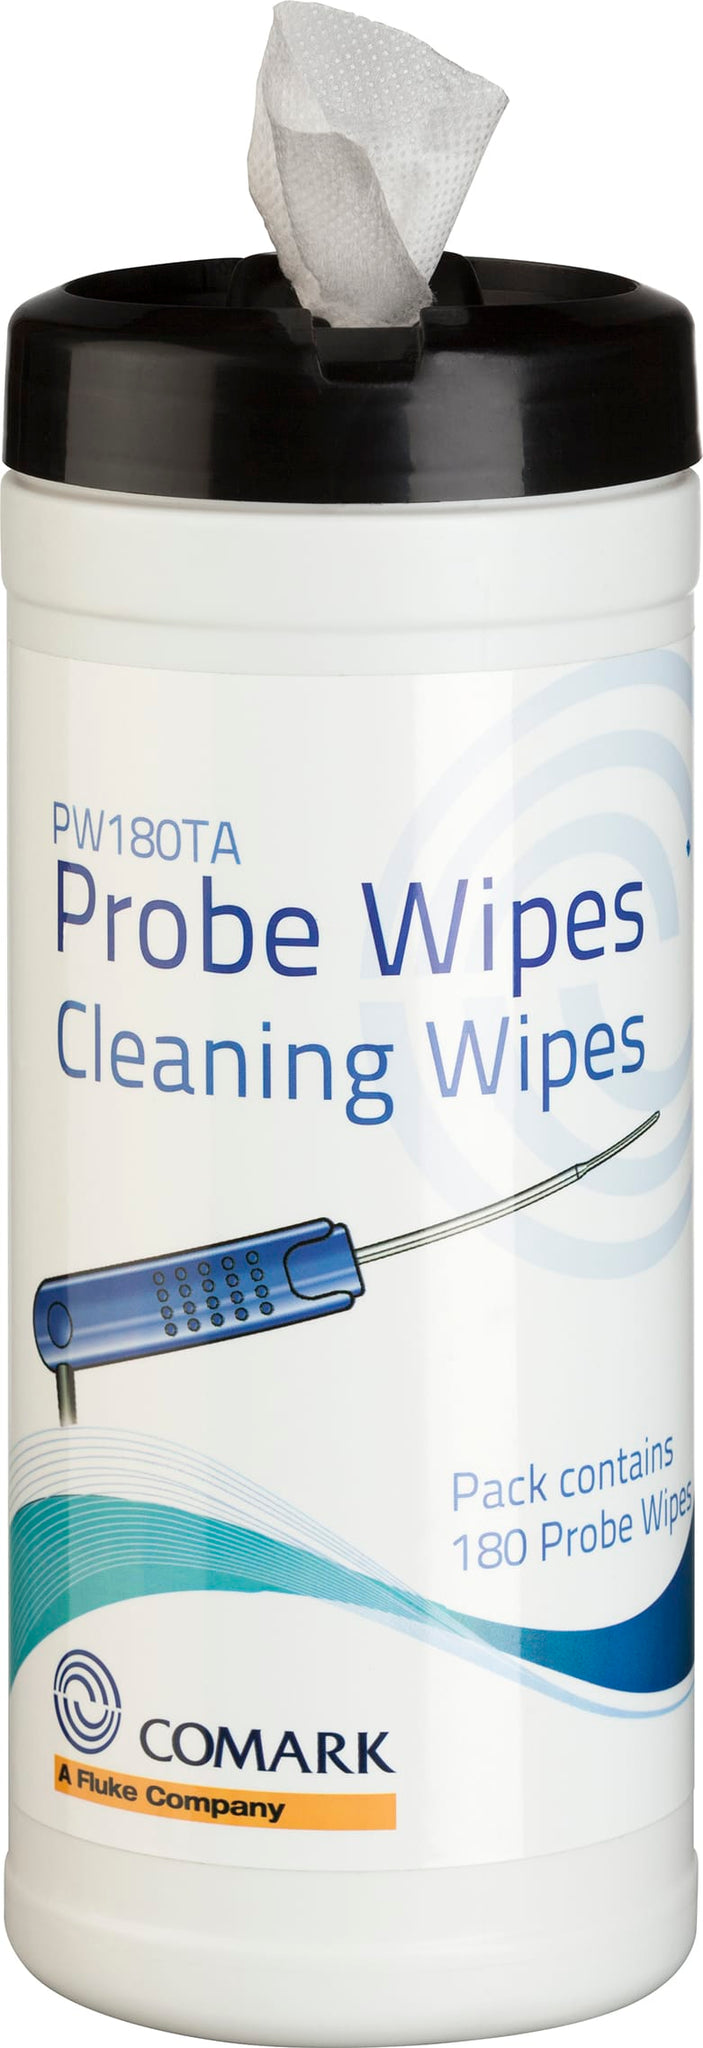 Comark - Thermometer Probe Wipes (180 Pack) - PW180TA